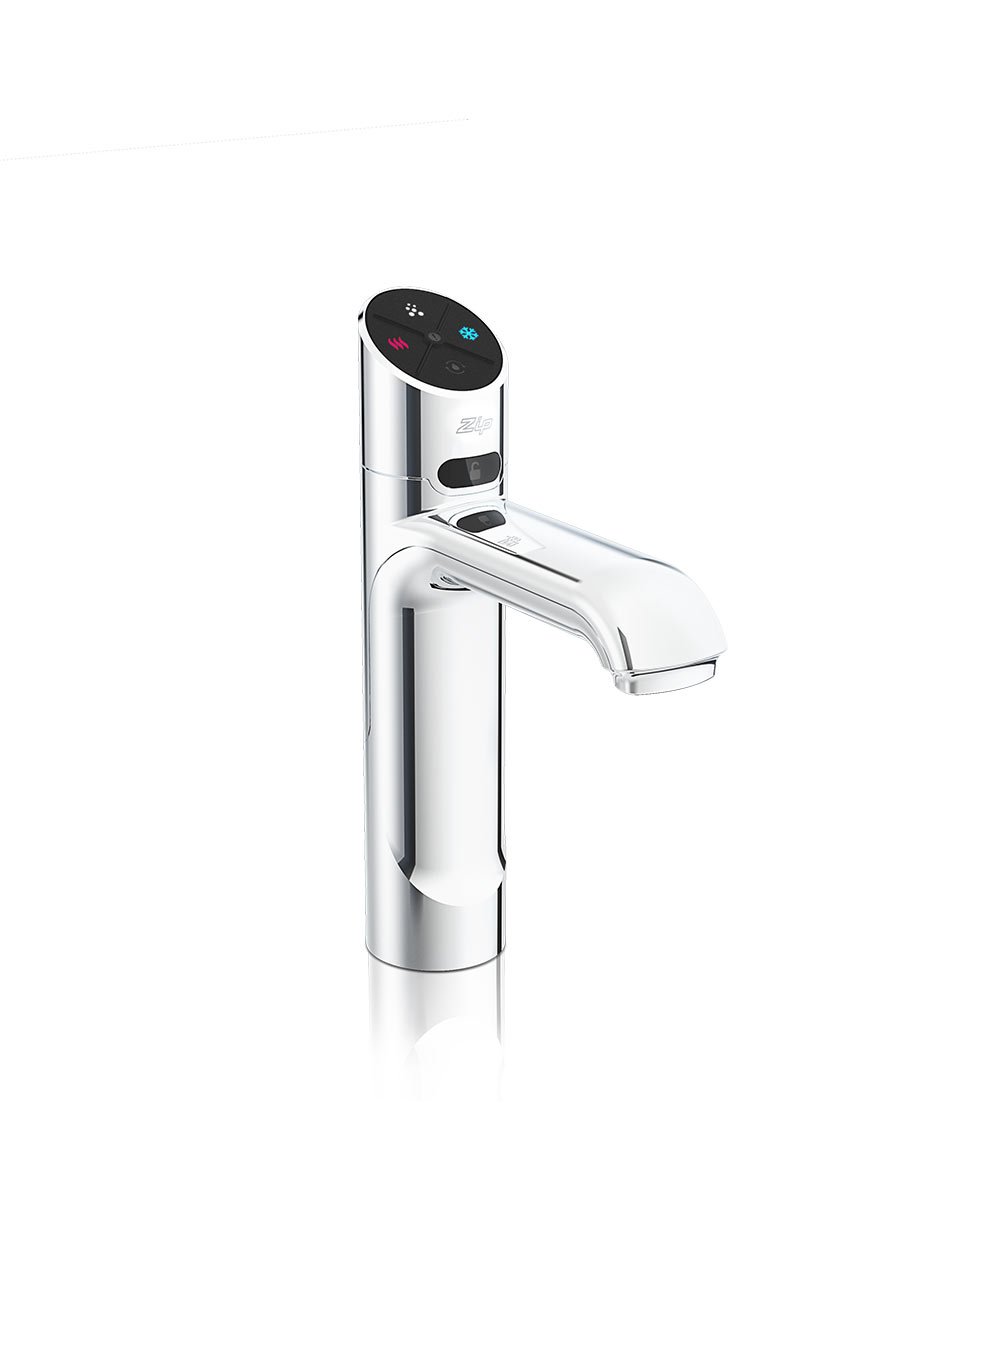  HydroTap G5 Cube Plus boiling chilled sparkling 